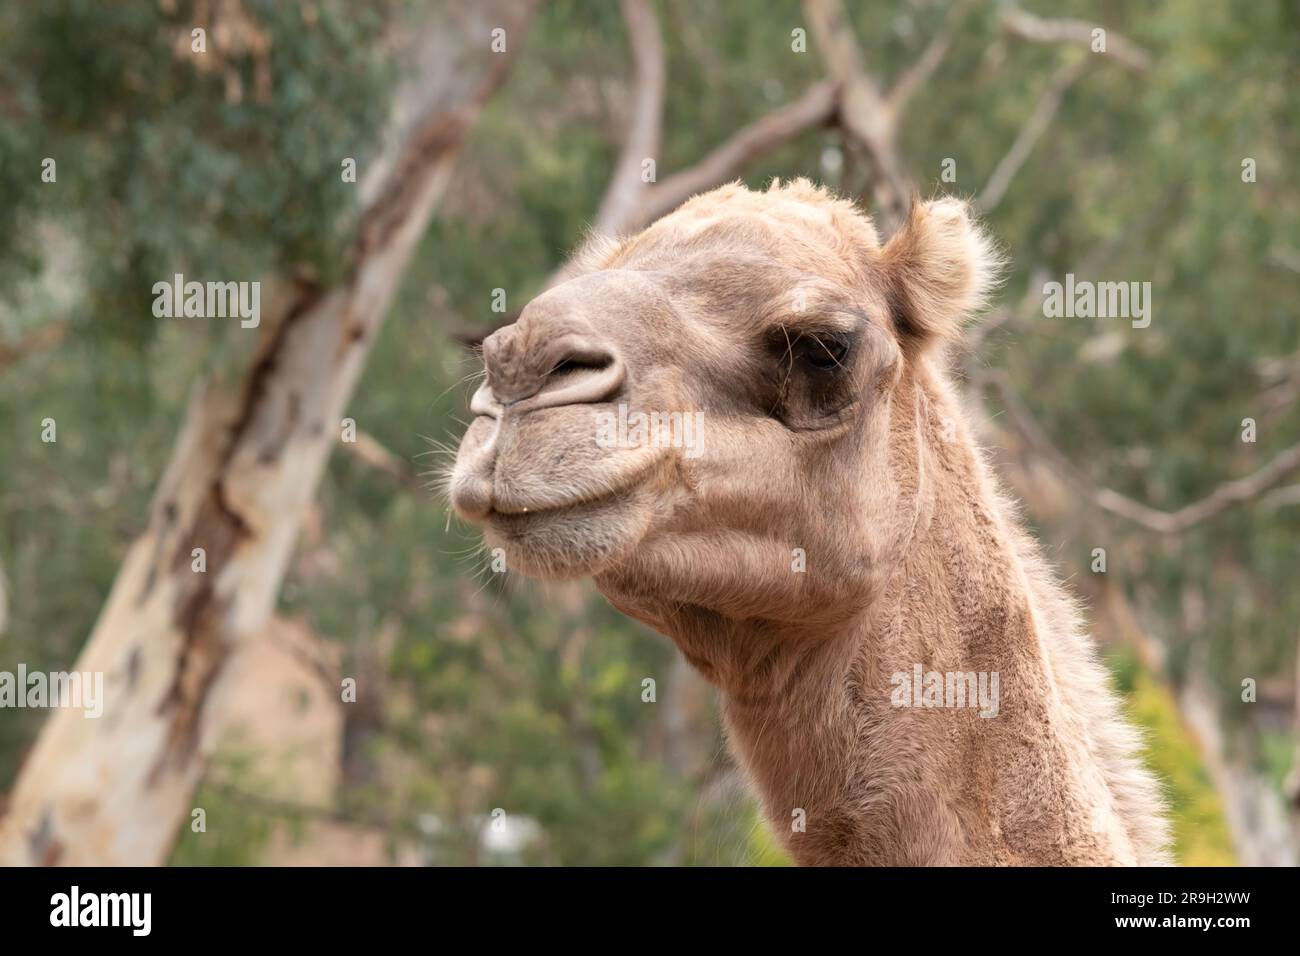 Camels are mammals with brown eyes, long lashes,  a big-lipped snout and a humped back. Stock Photo